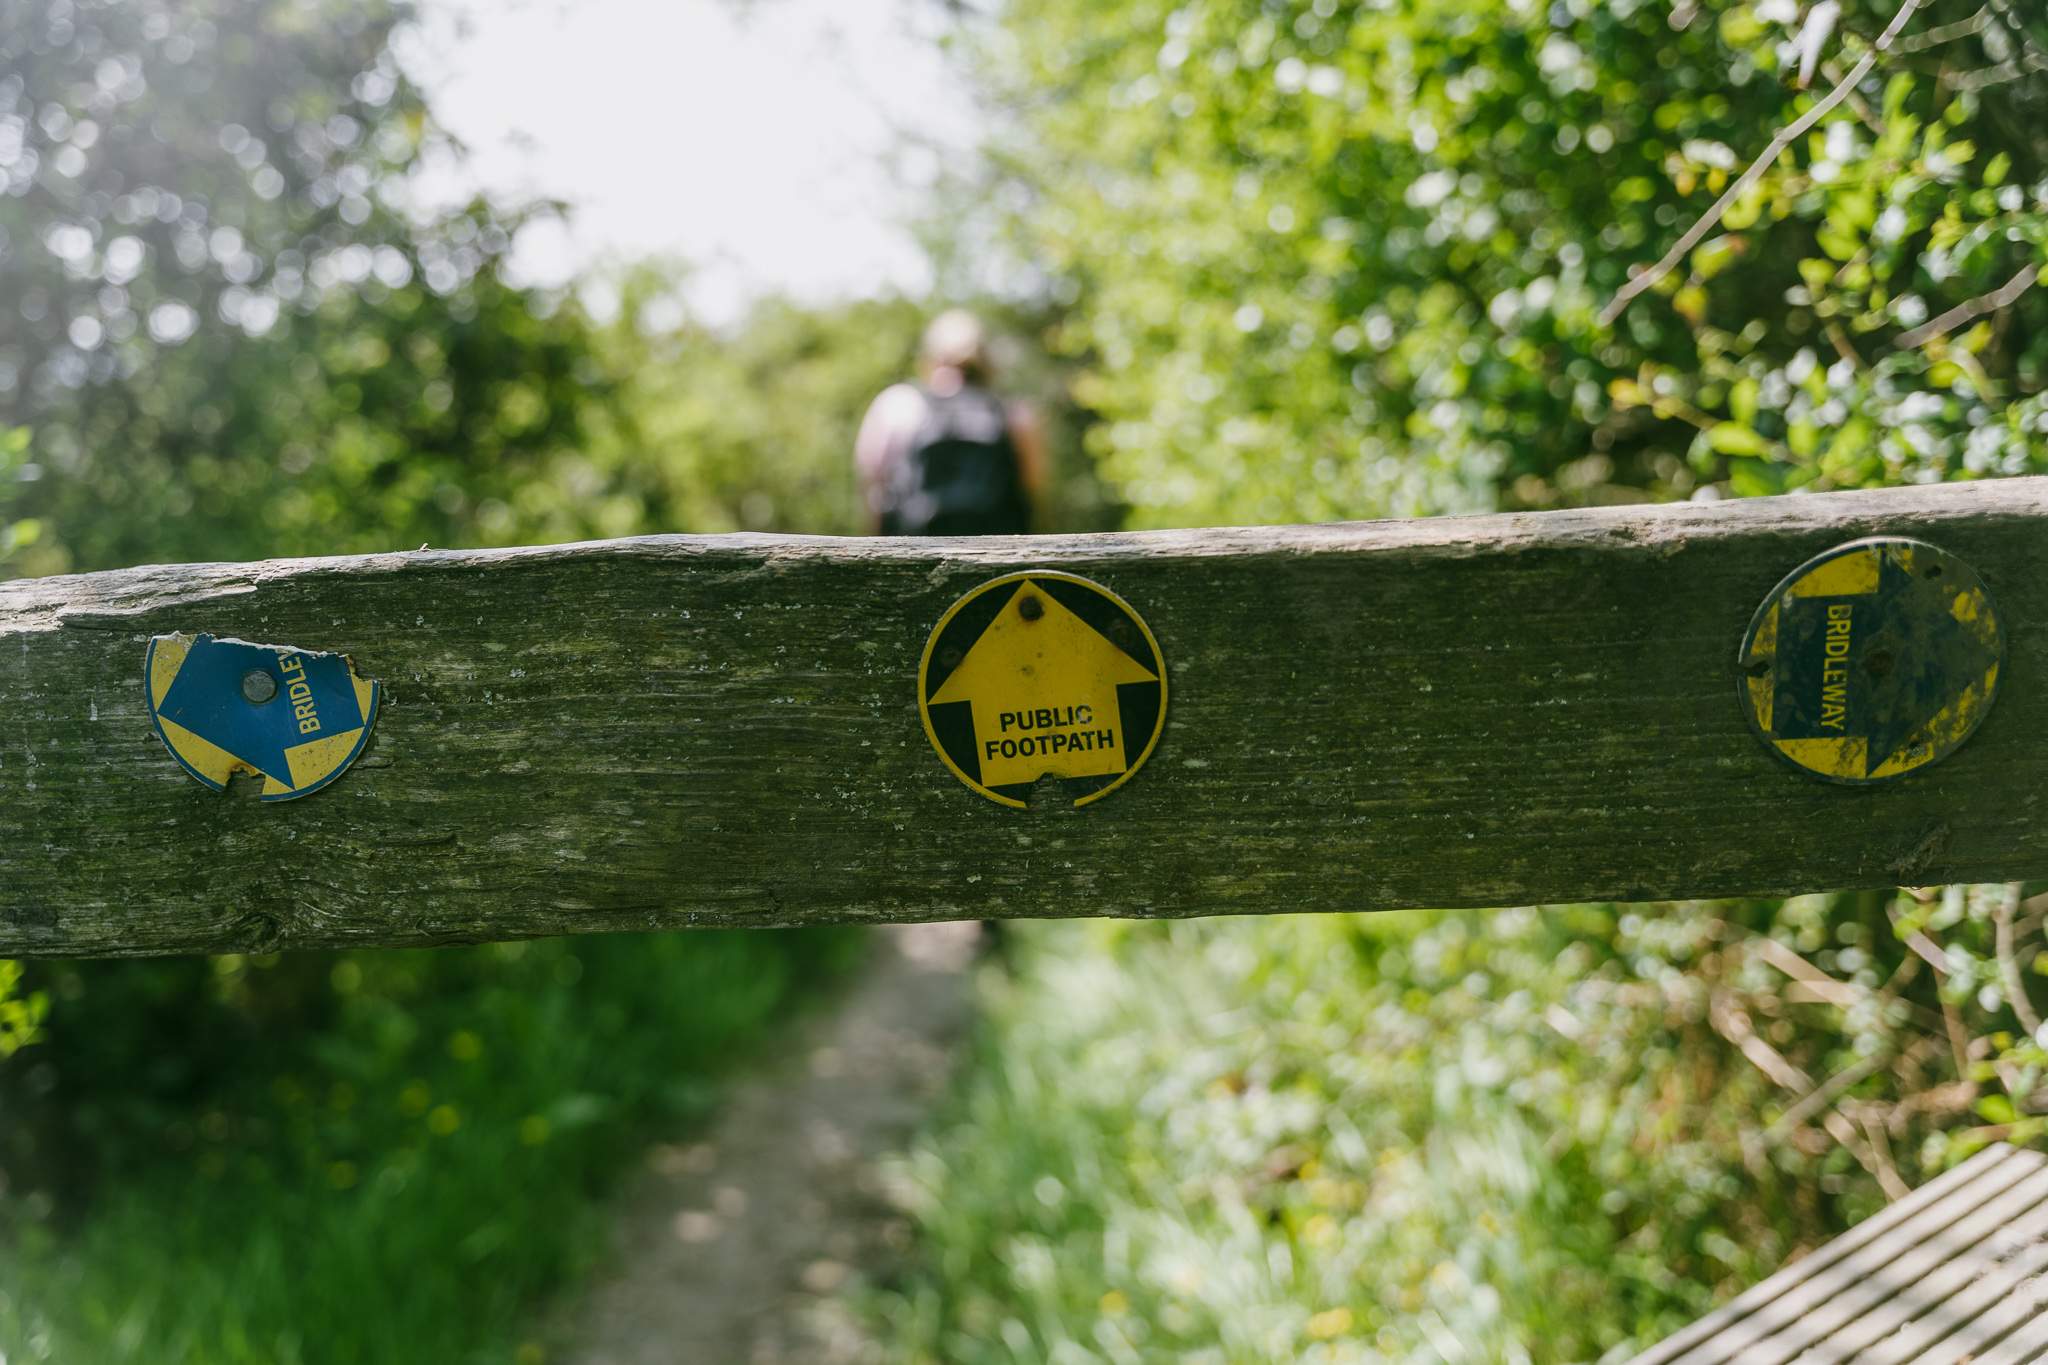 A public footpath sign on one of the many gates we've crossed.